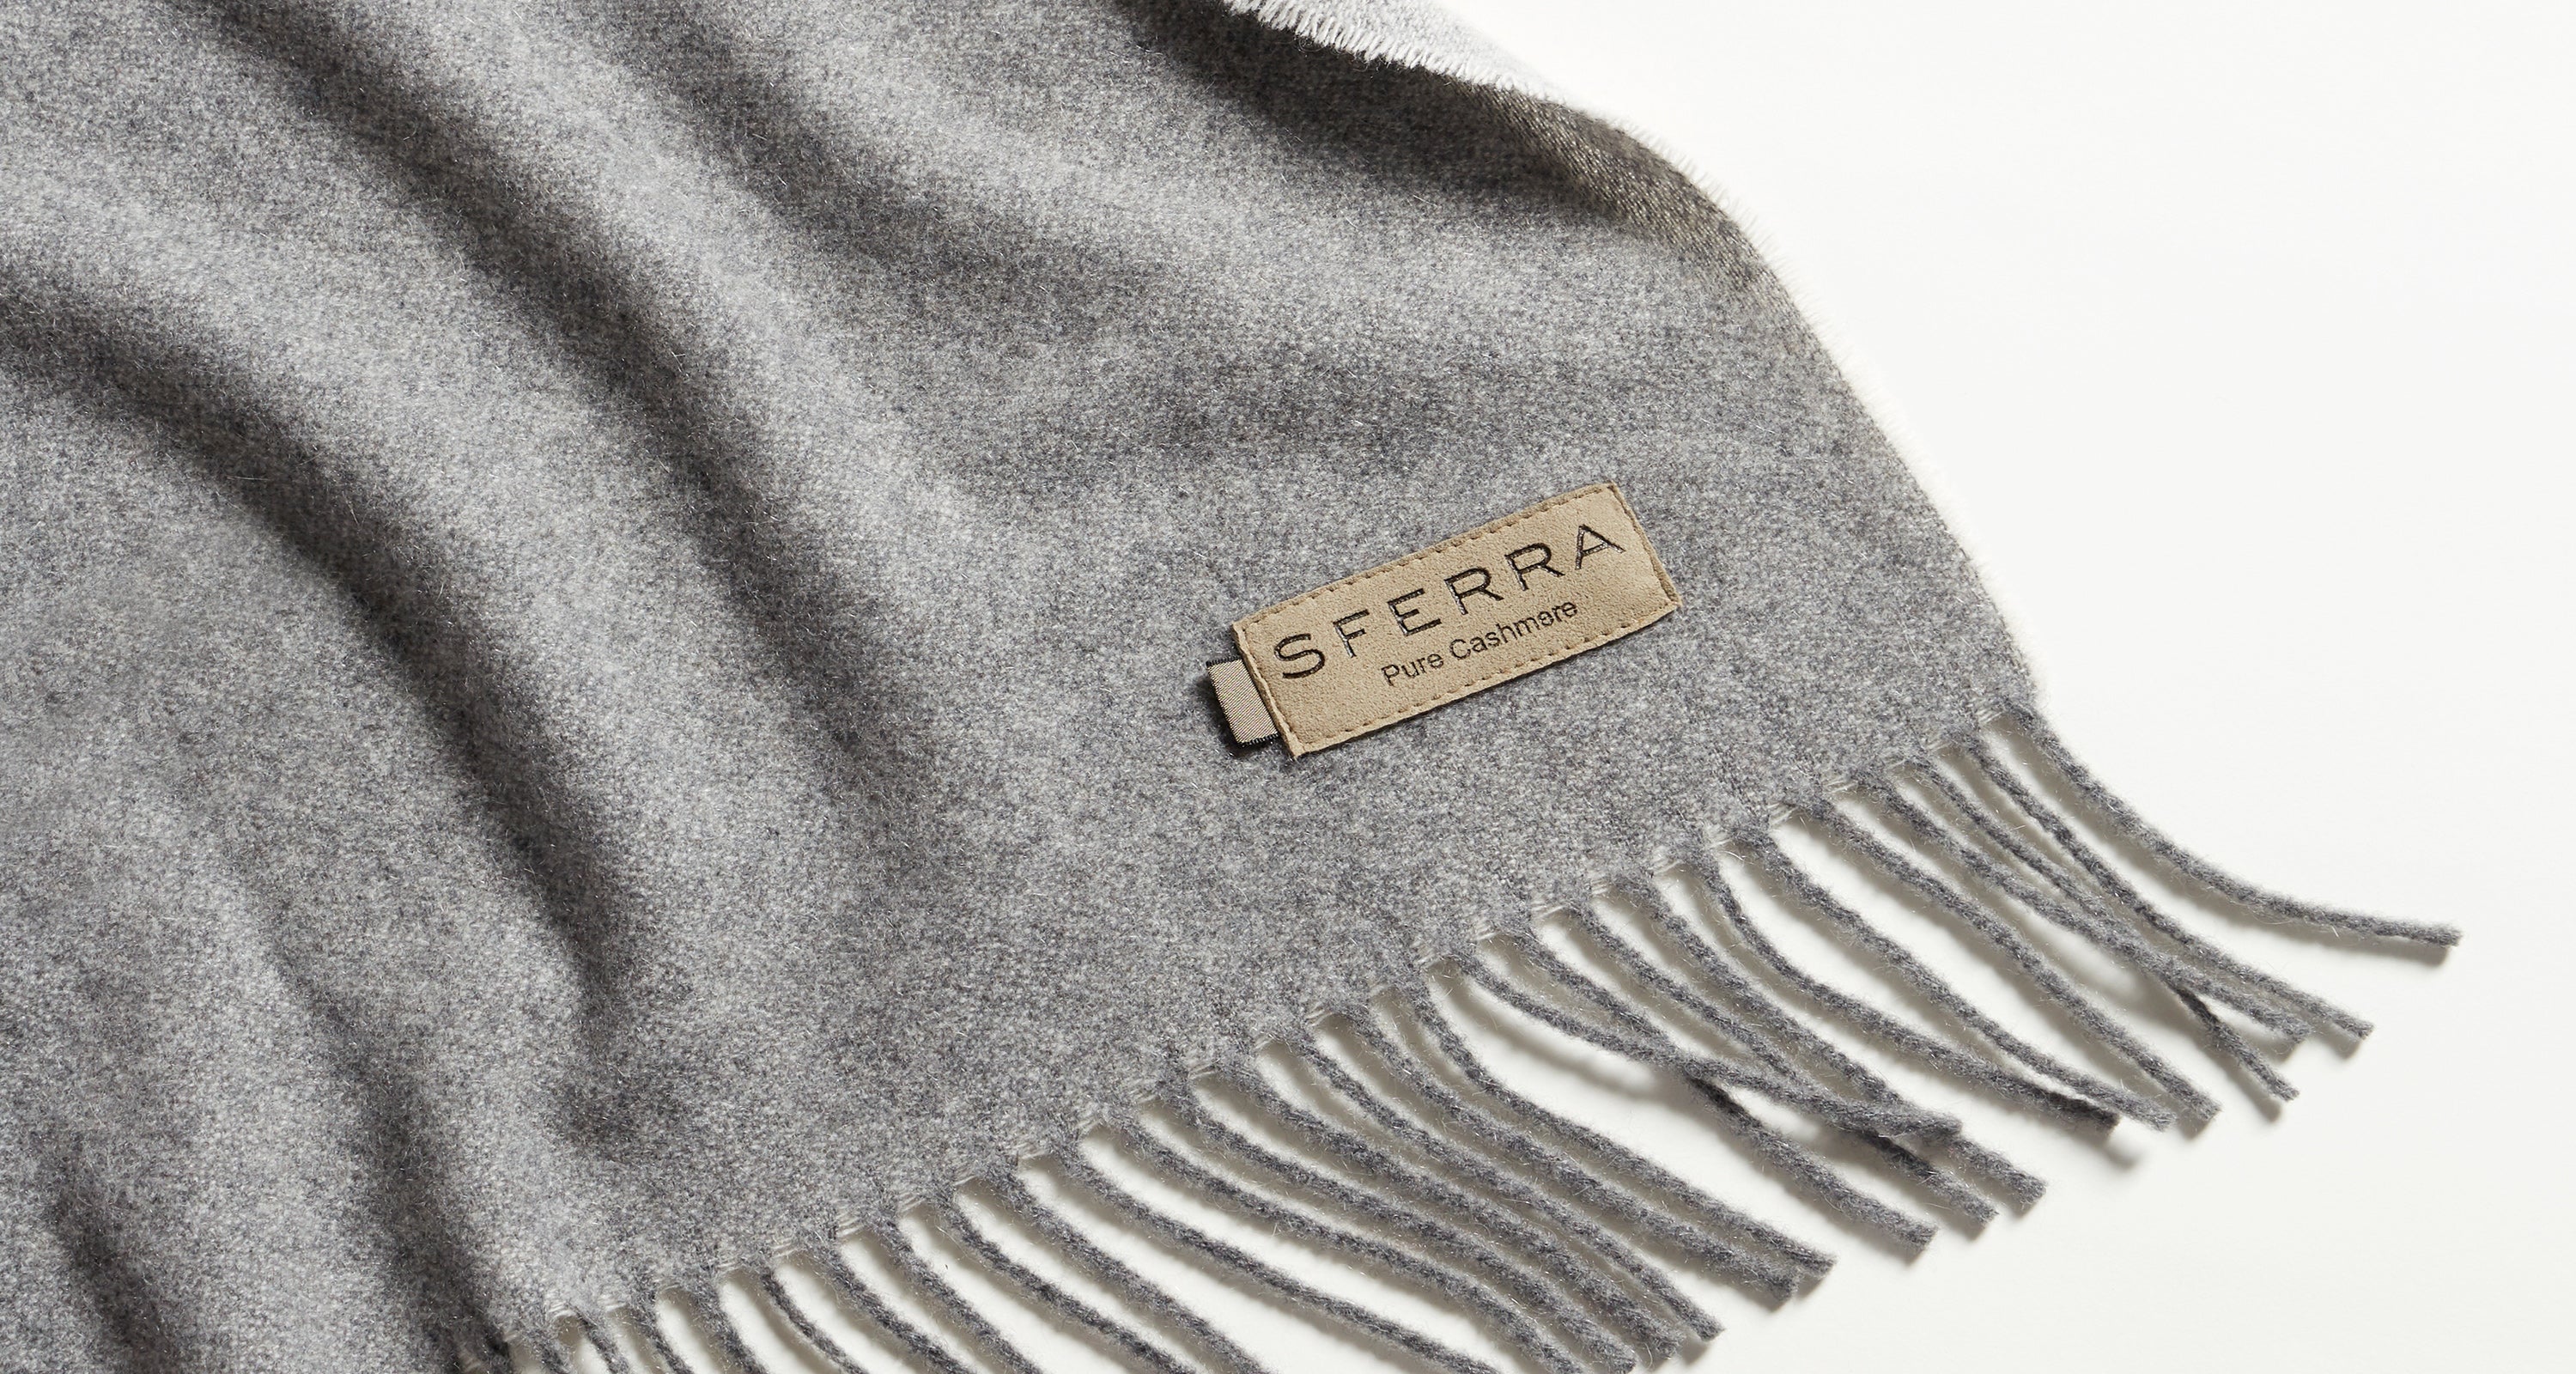 Cashmere Collection